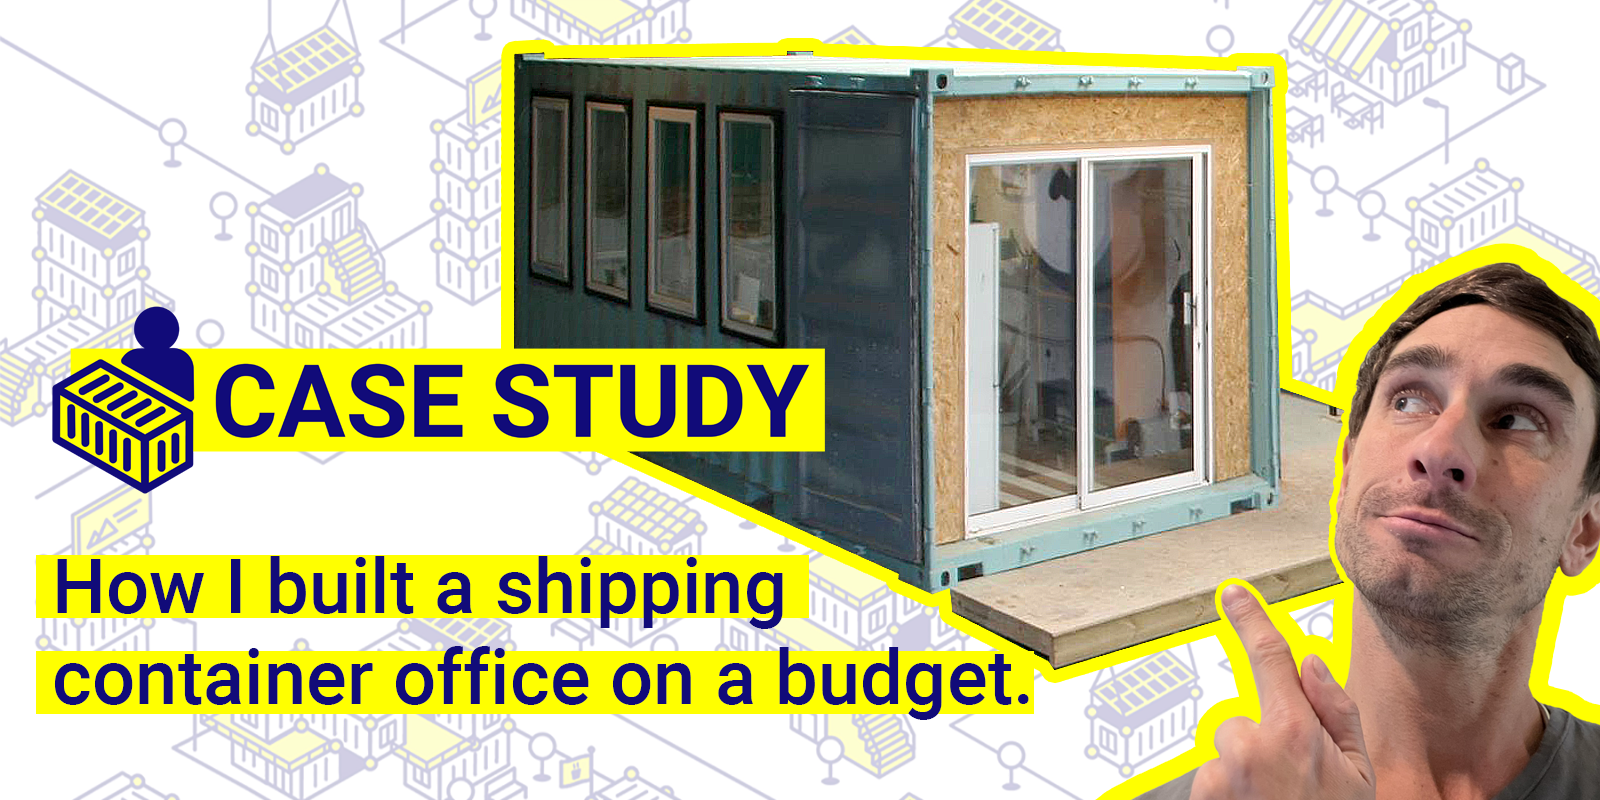 How I built a shipping container office on a budget